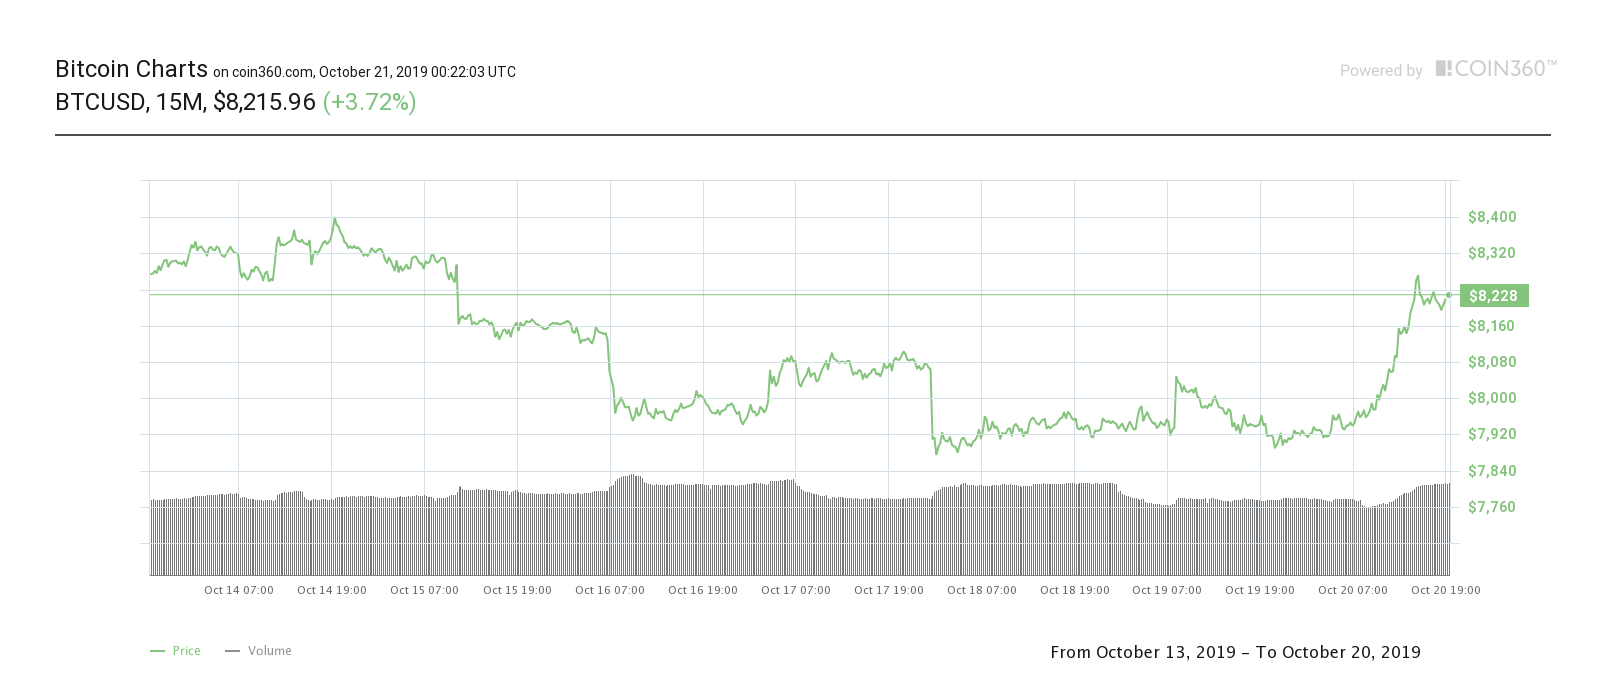 Bitcoin seven-day price chart. Source: Coin360